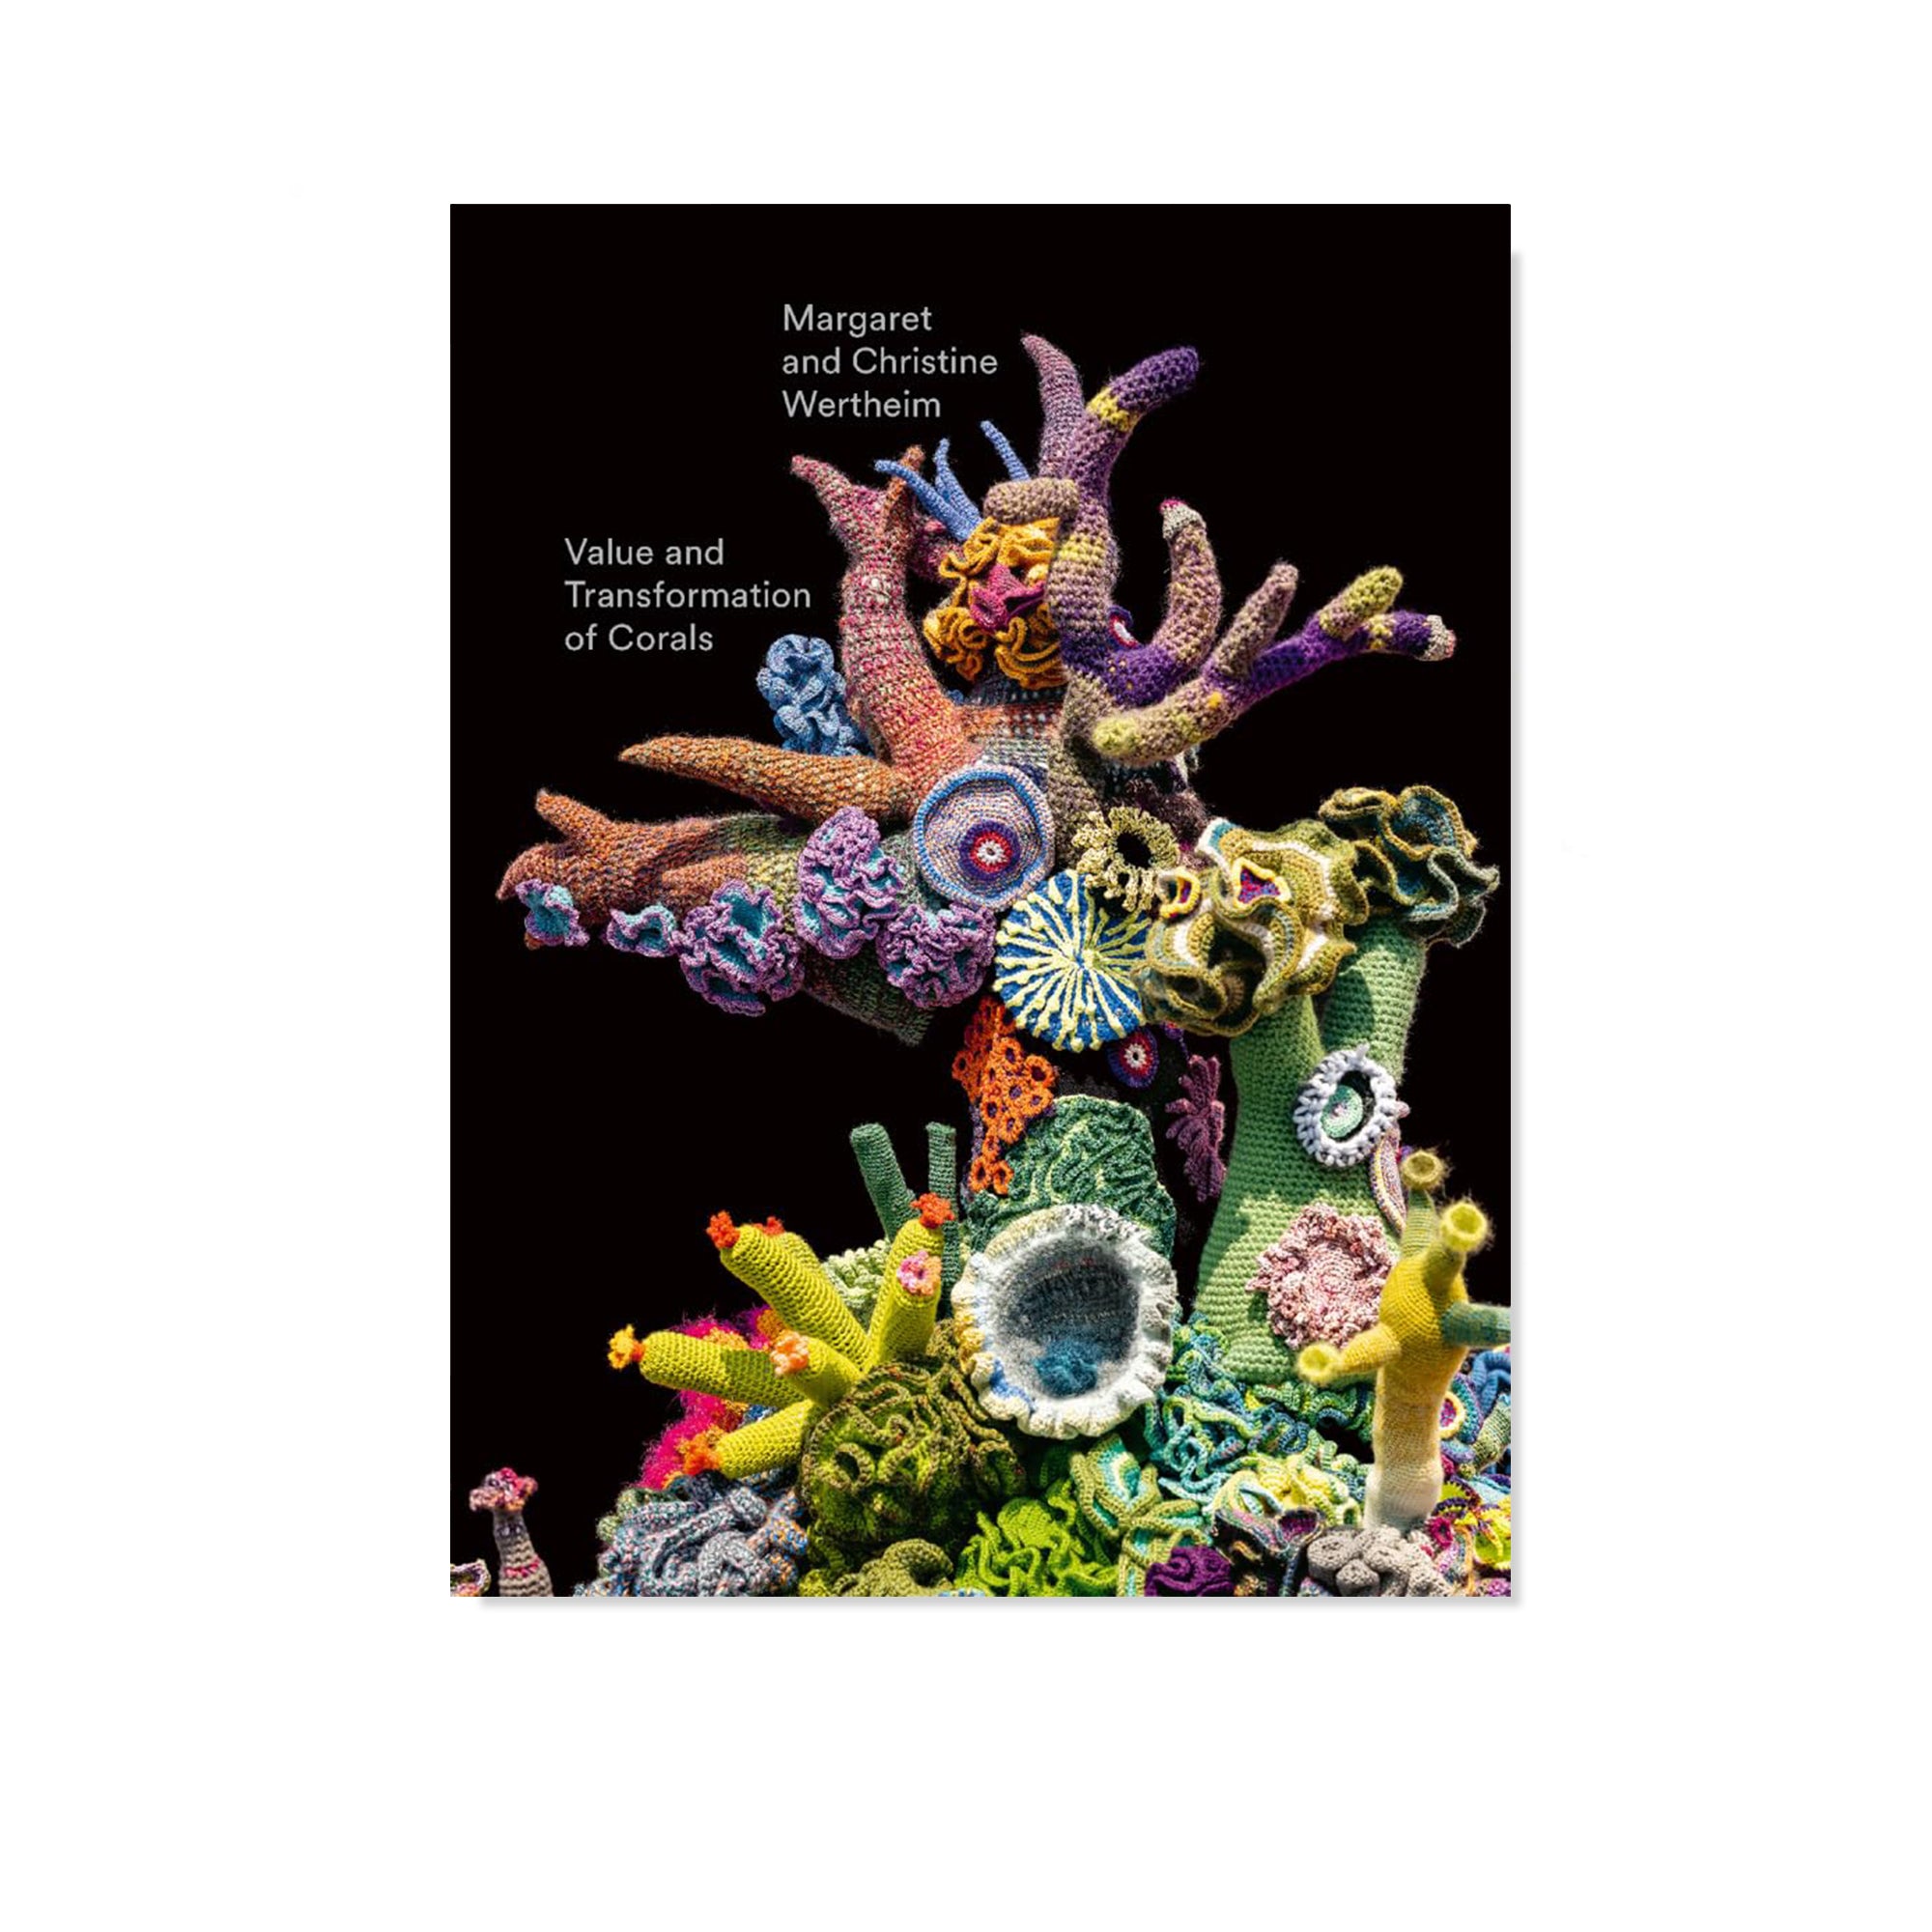 Value and Transformation of Corals: Catalogue for the Exhibition at Museum Frieder